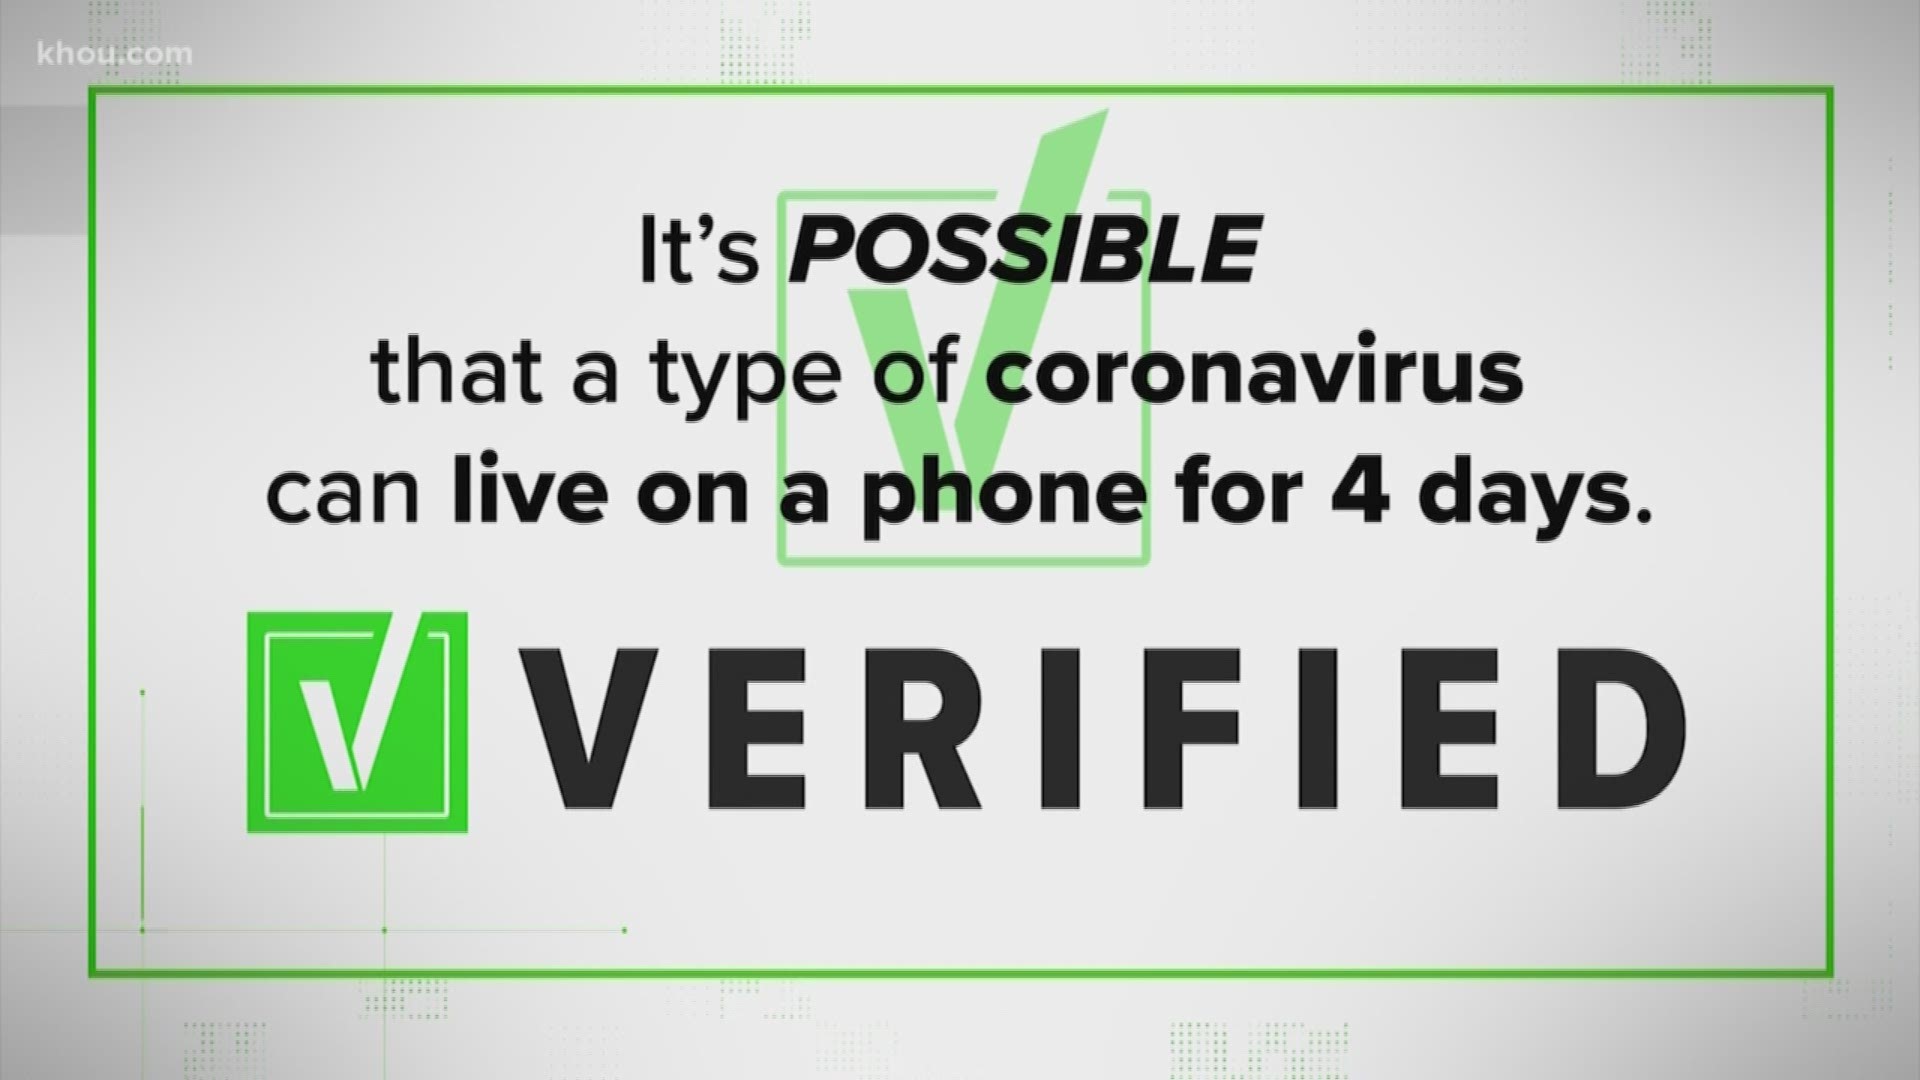 Preventing the spread of coronavirus! You've heard "wash your hands" and "don't touch your face," but what about your phone?